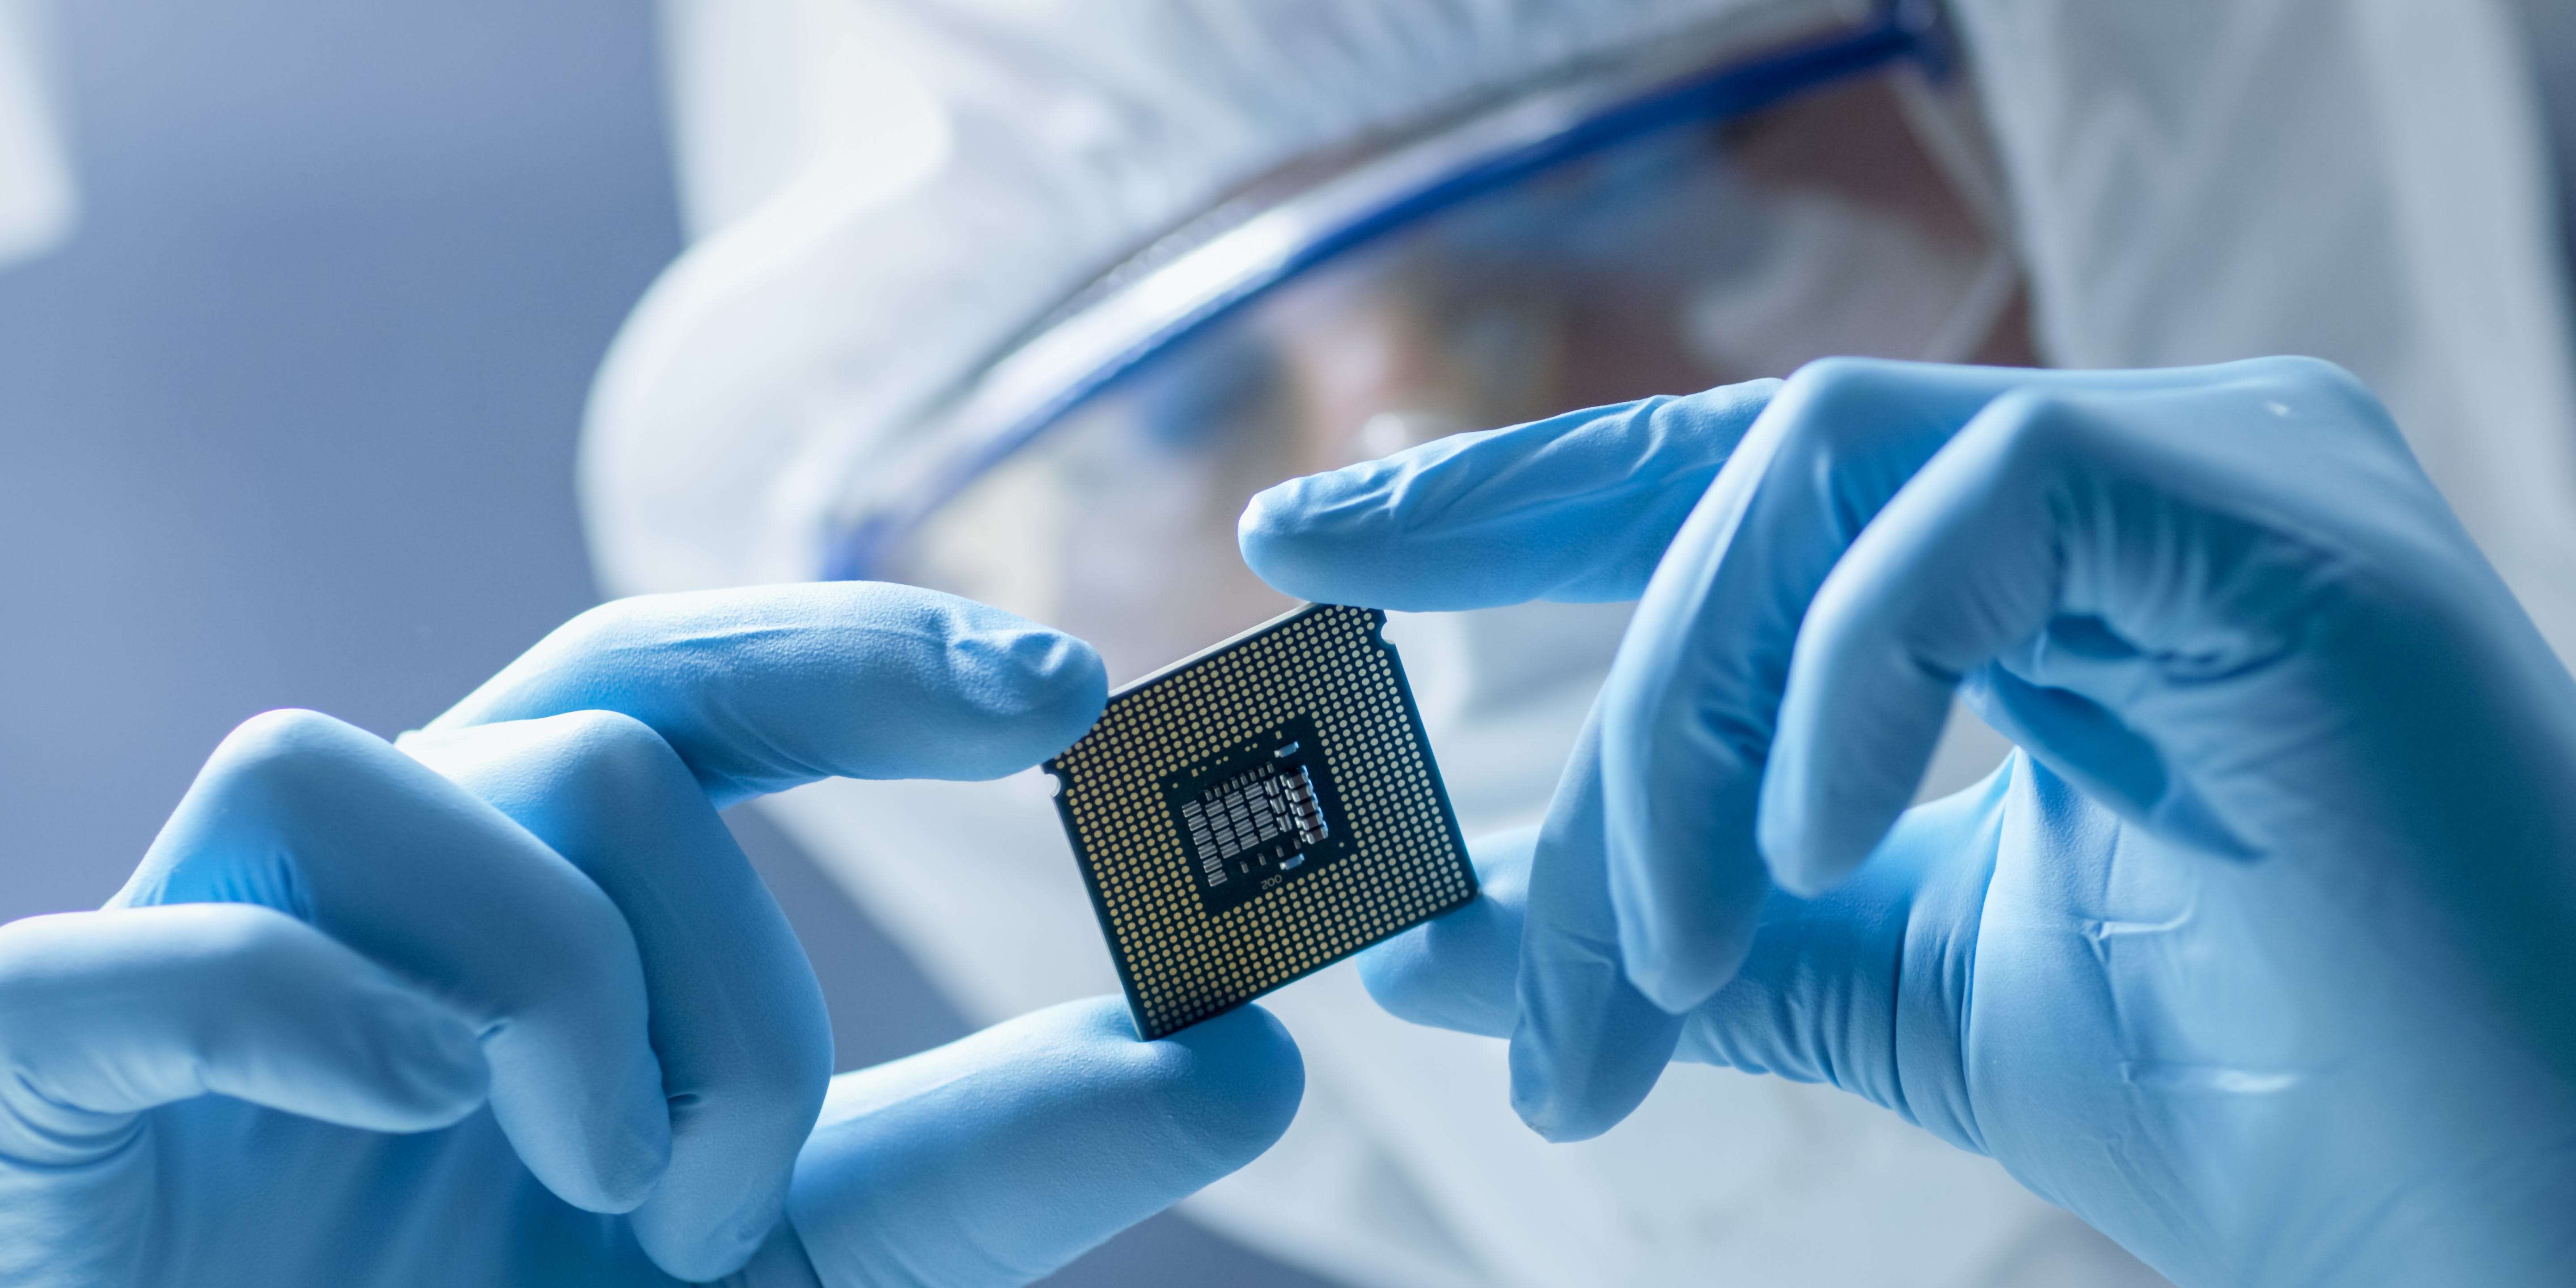 The global chip shortage is hurting businesses and could be a national